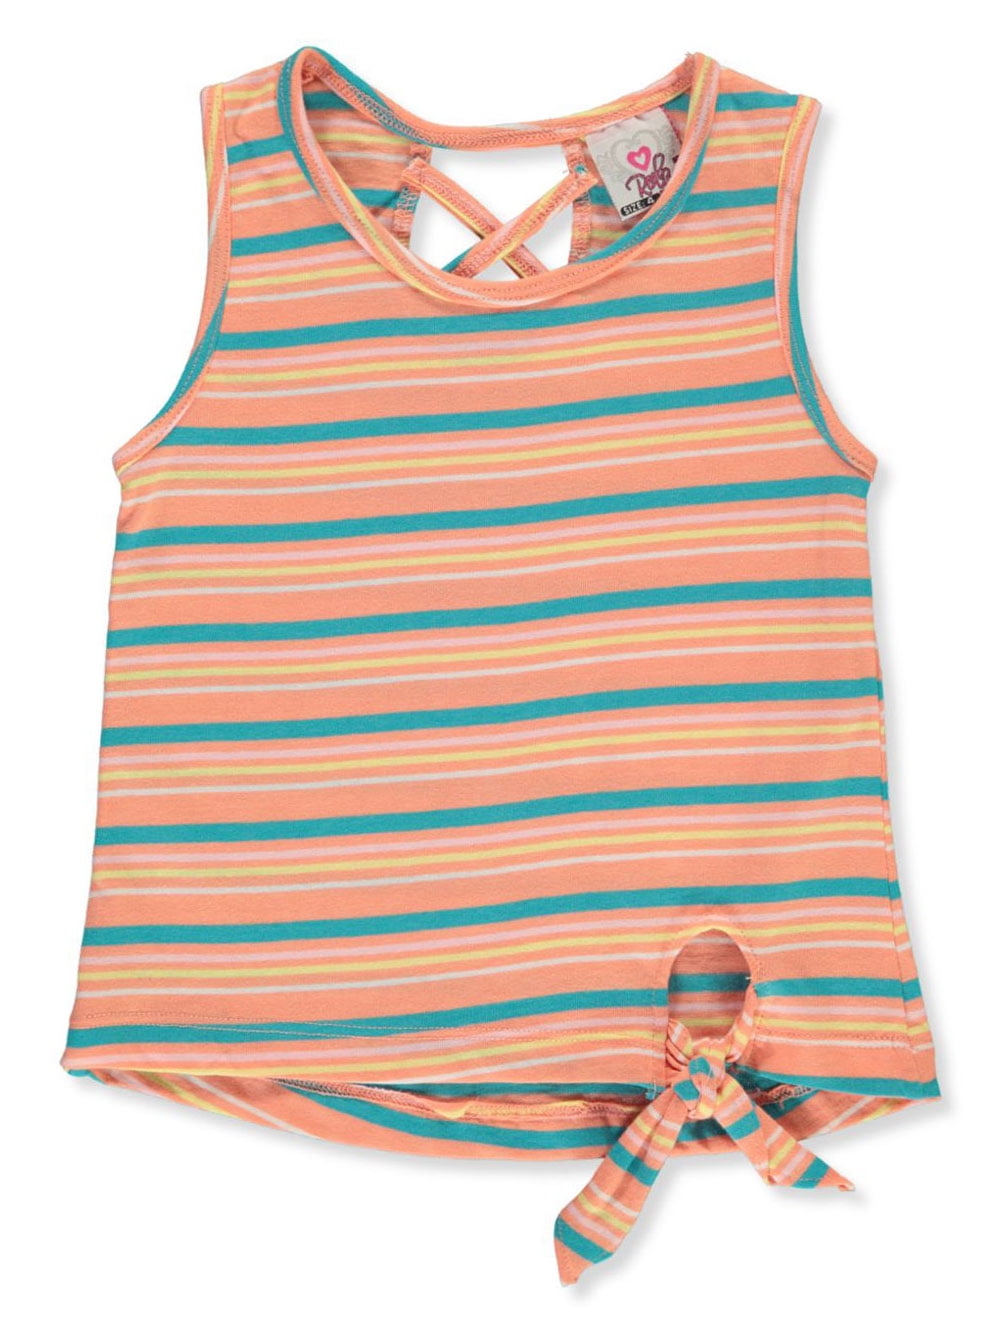 Real Love Girls' Striped Tank Top - coral/multi, 4 (Little Girls ...